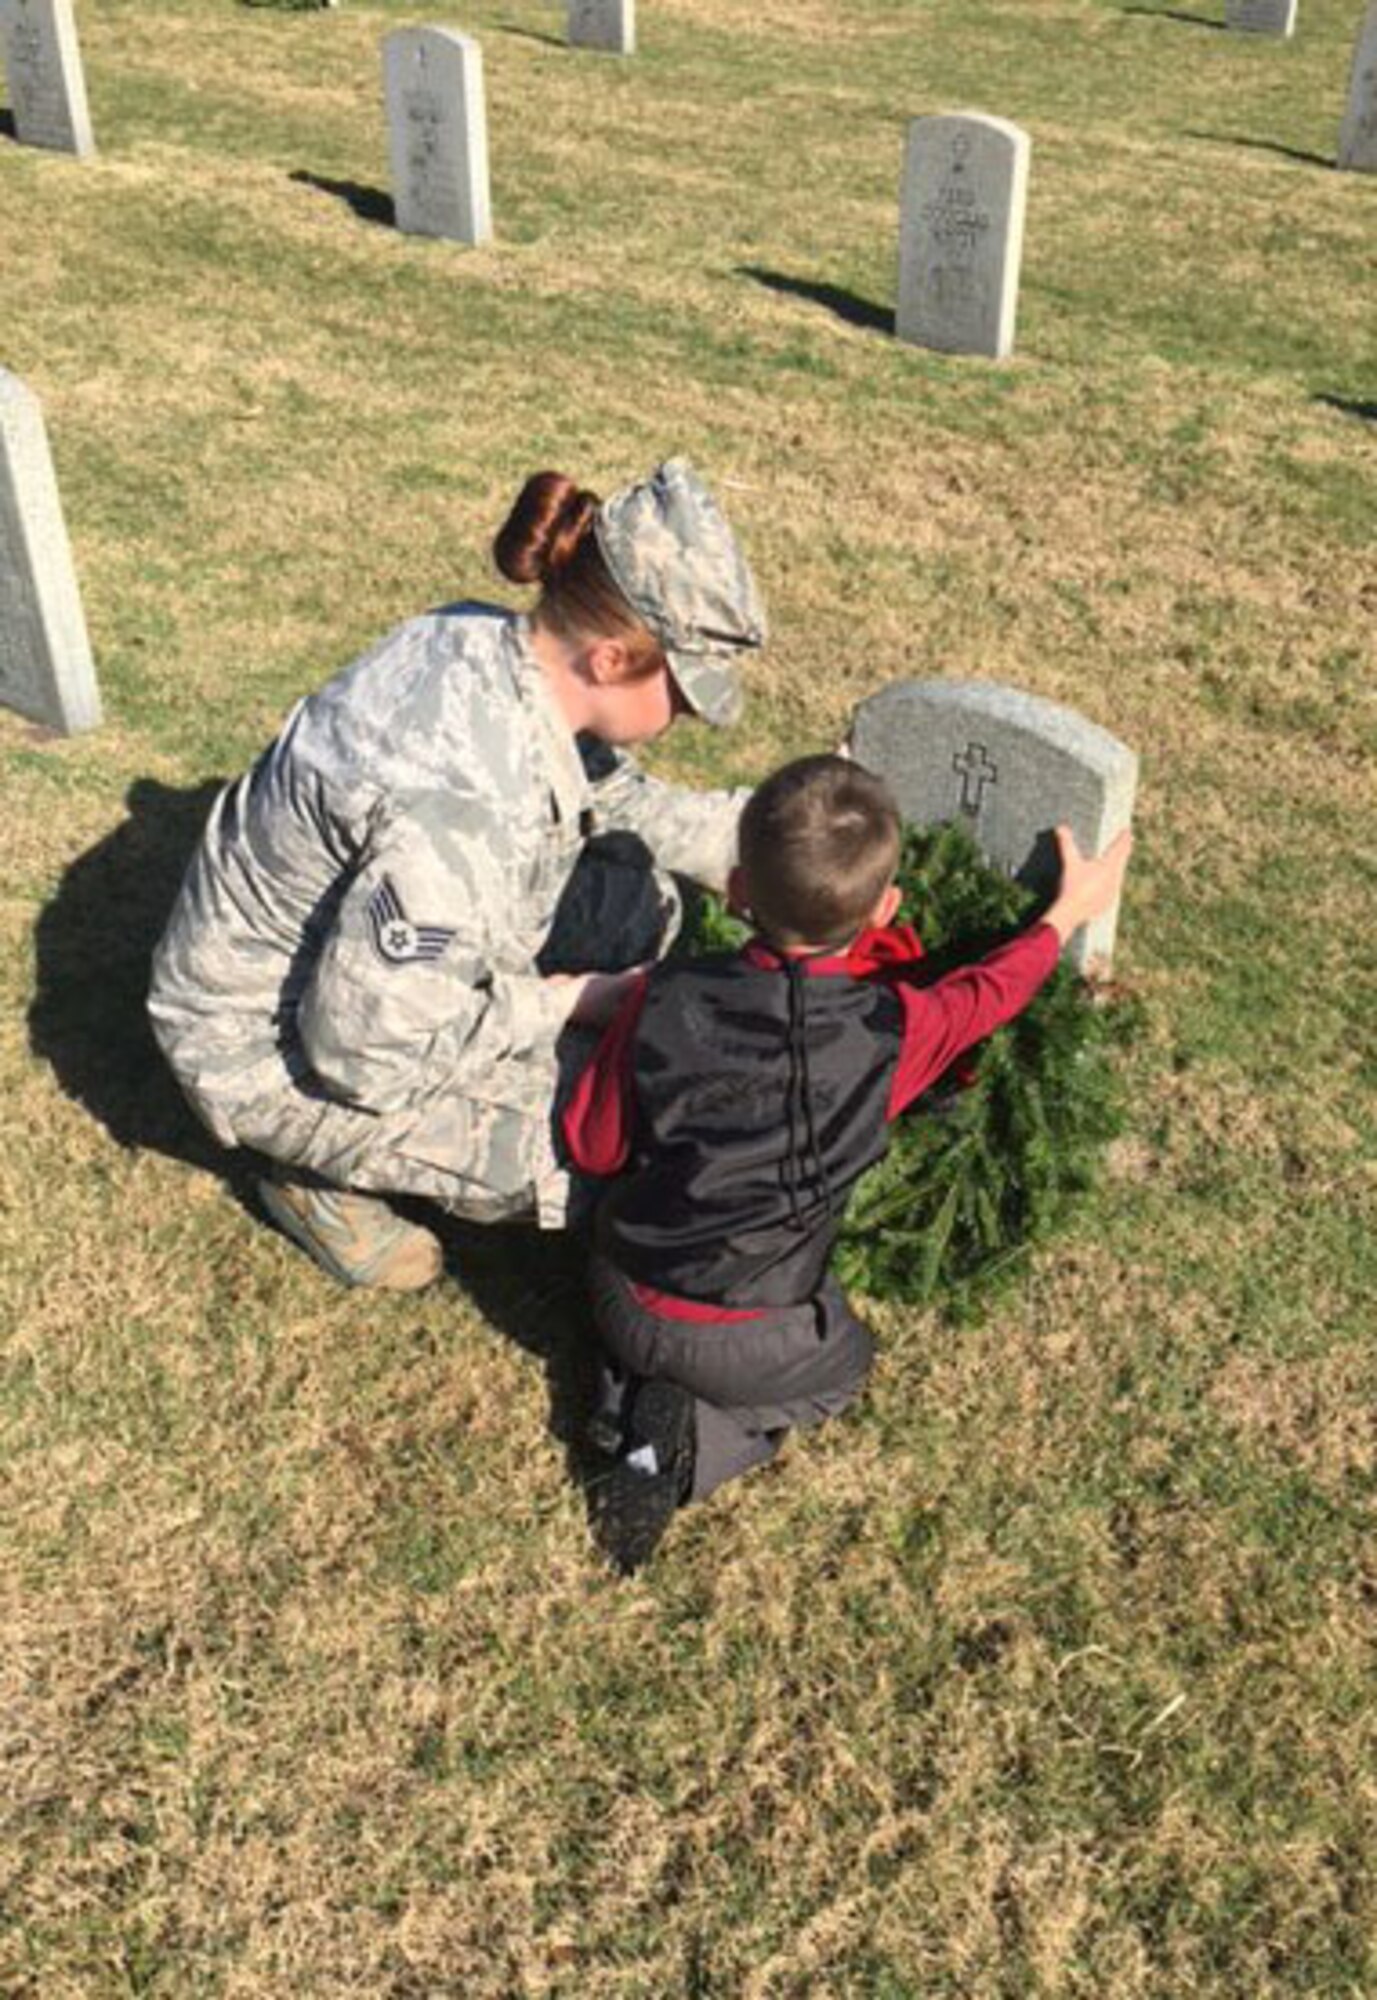 Staff Sgt. Brittany Liddon, NCO in charge of Community Relations assigned to the 6th Air Mobility Wing Public Affairs office, and her son, Easton, place a wreath on a gravesite at Florida National Cemetery in Bushnell, Fla., Dec. 17, 2016. Liddon and her son participated in the 11th Annual Wreath Laying Ceremony at Florida National Cemetery to honor fallen service members. (U.S. Air Force photo by Senior Airman Tori Schultz)